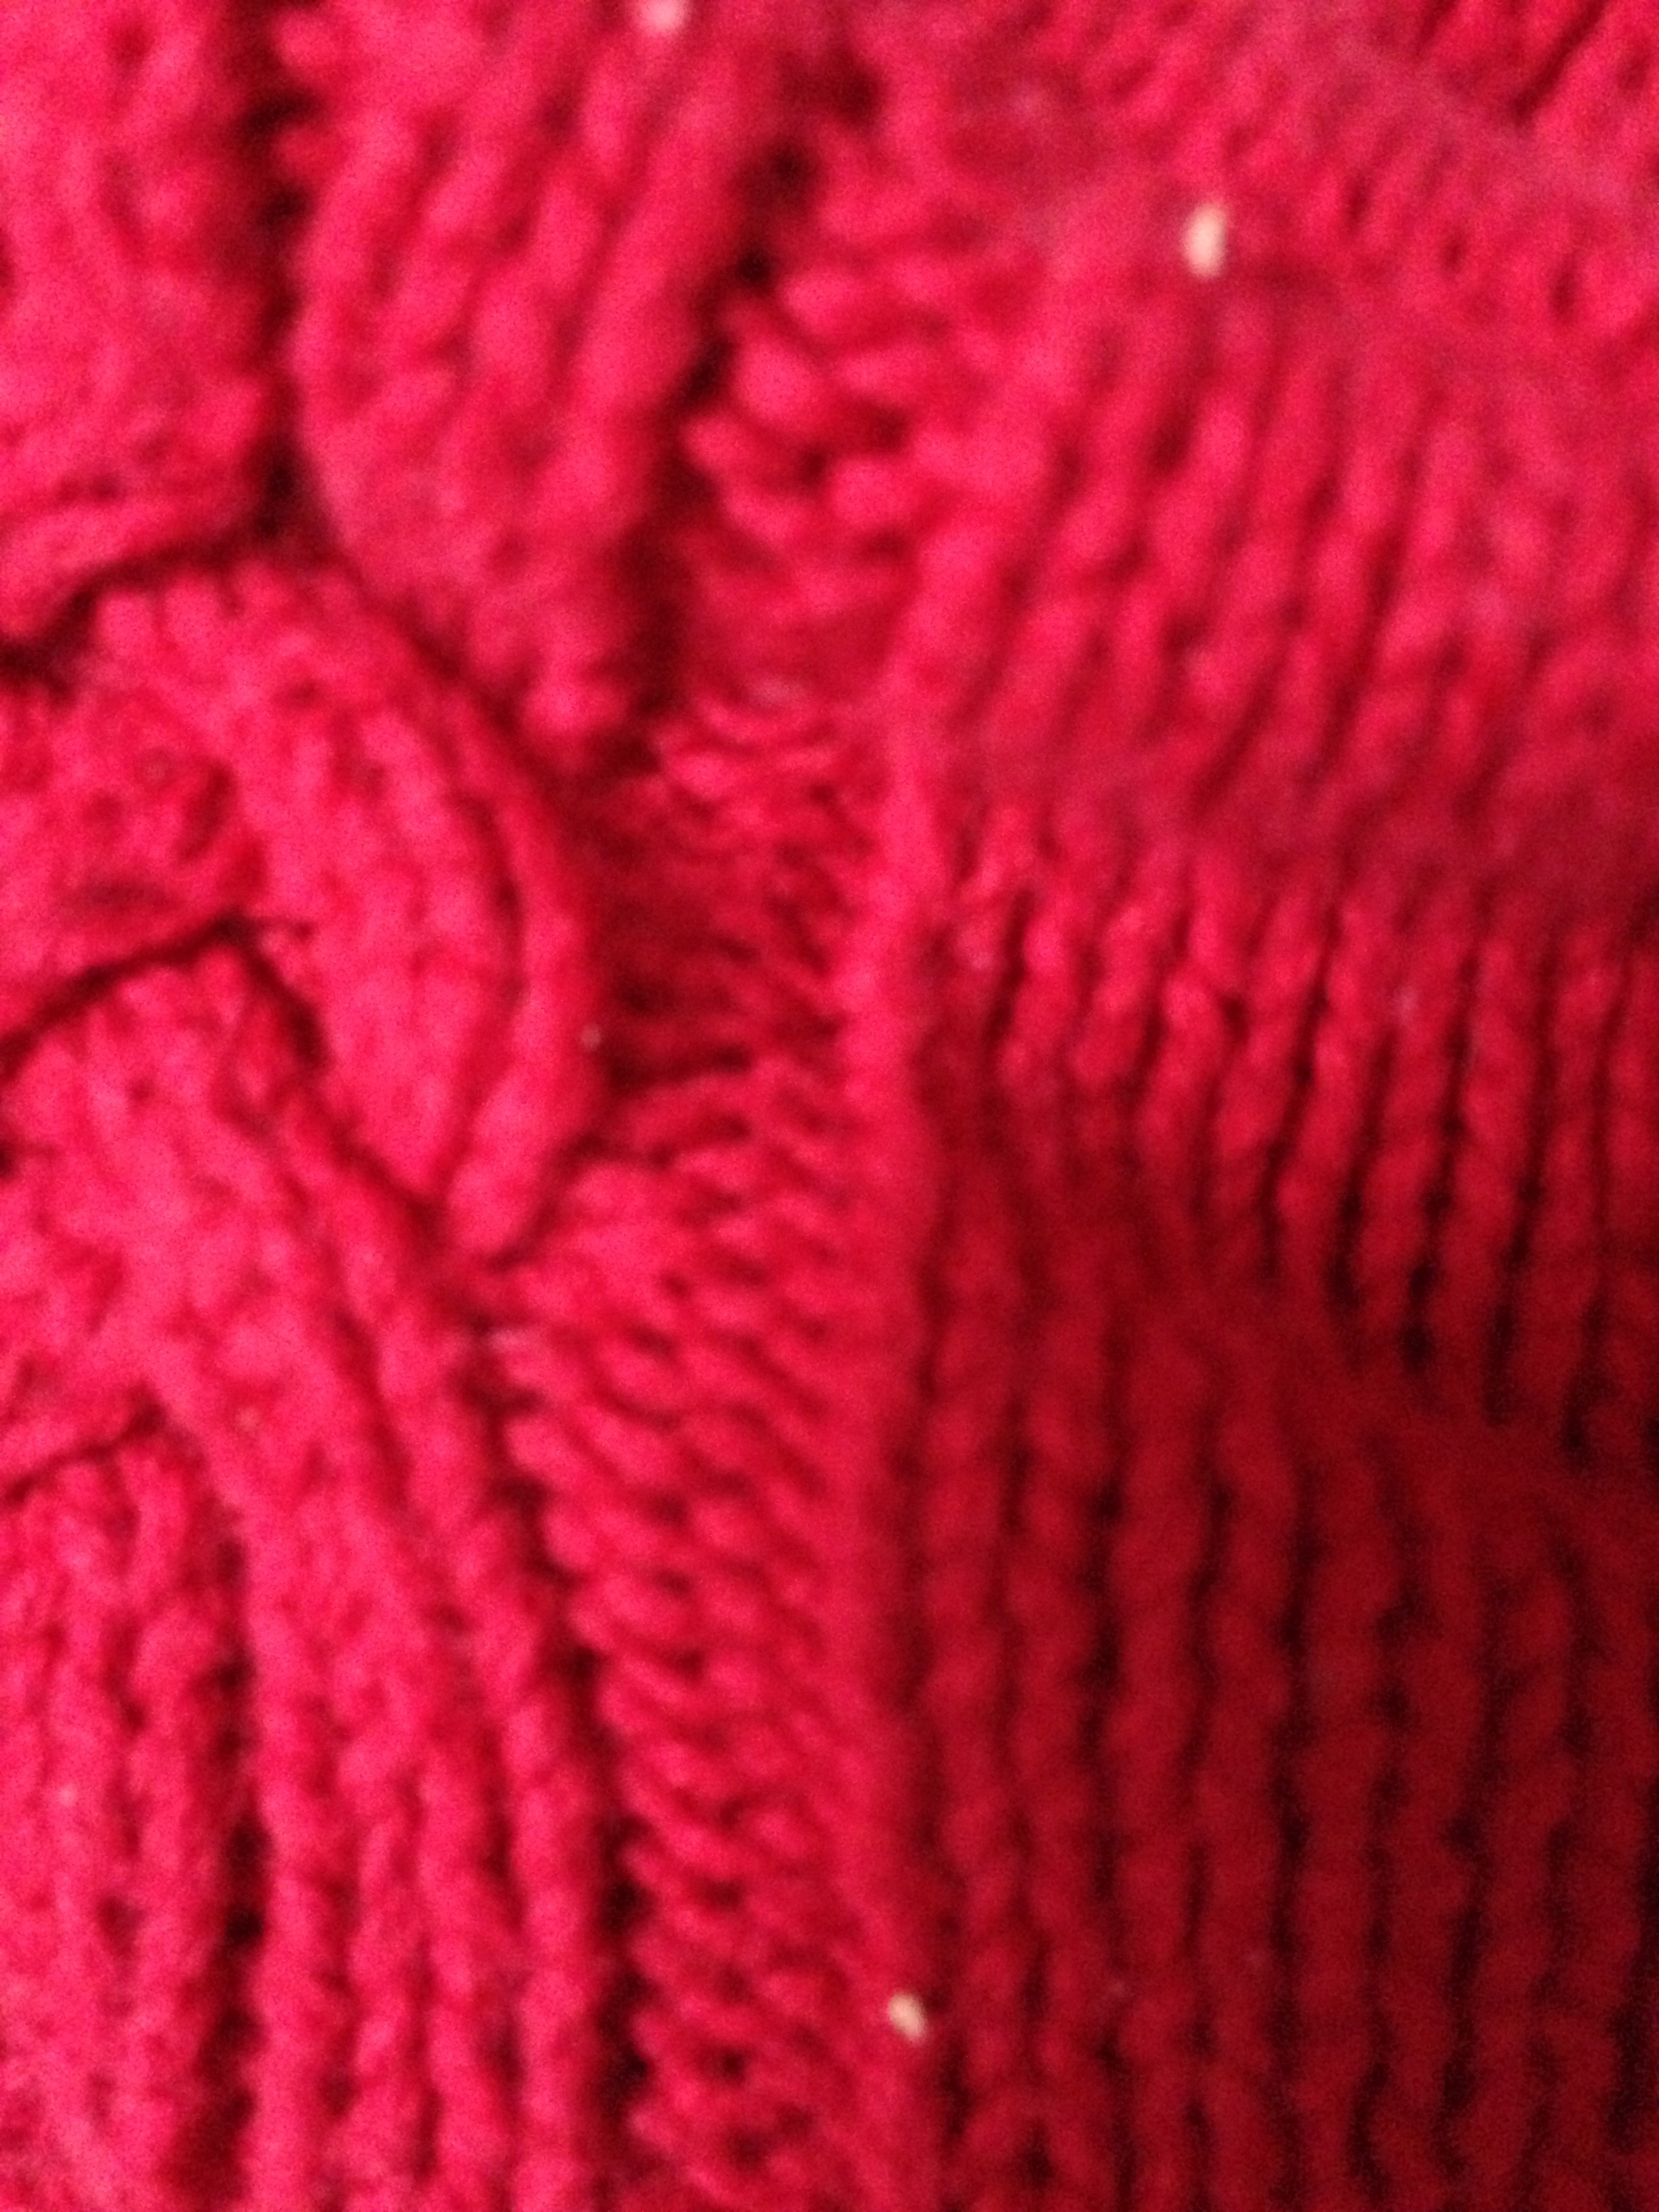 red cable knit sweater texture